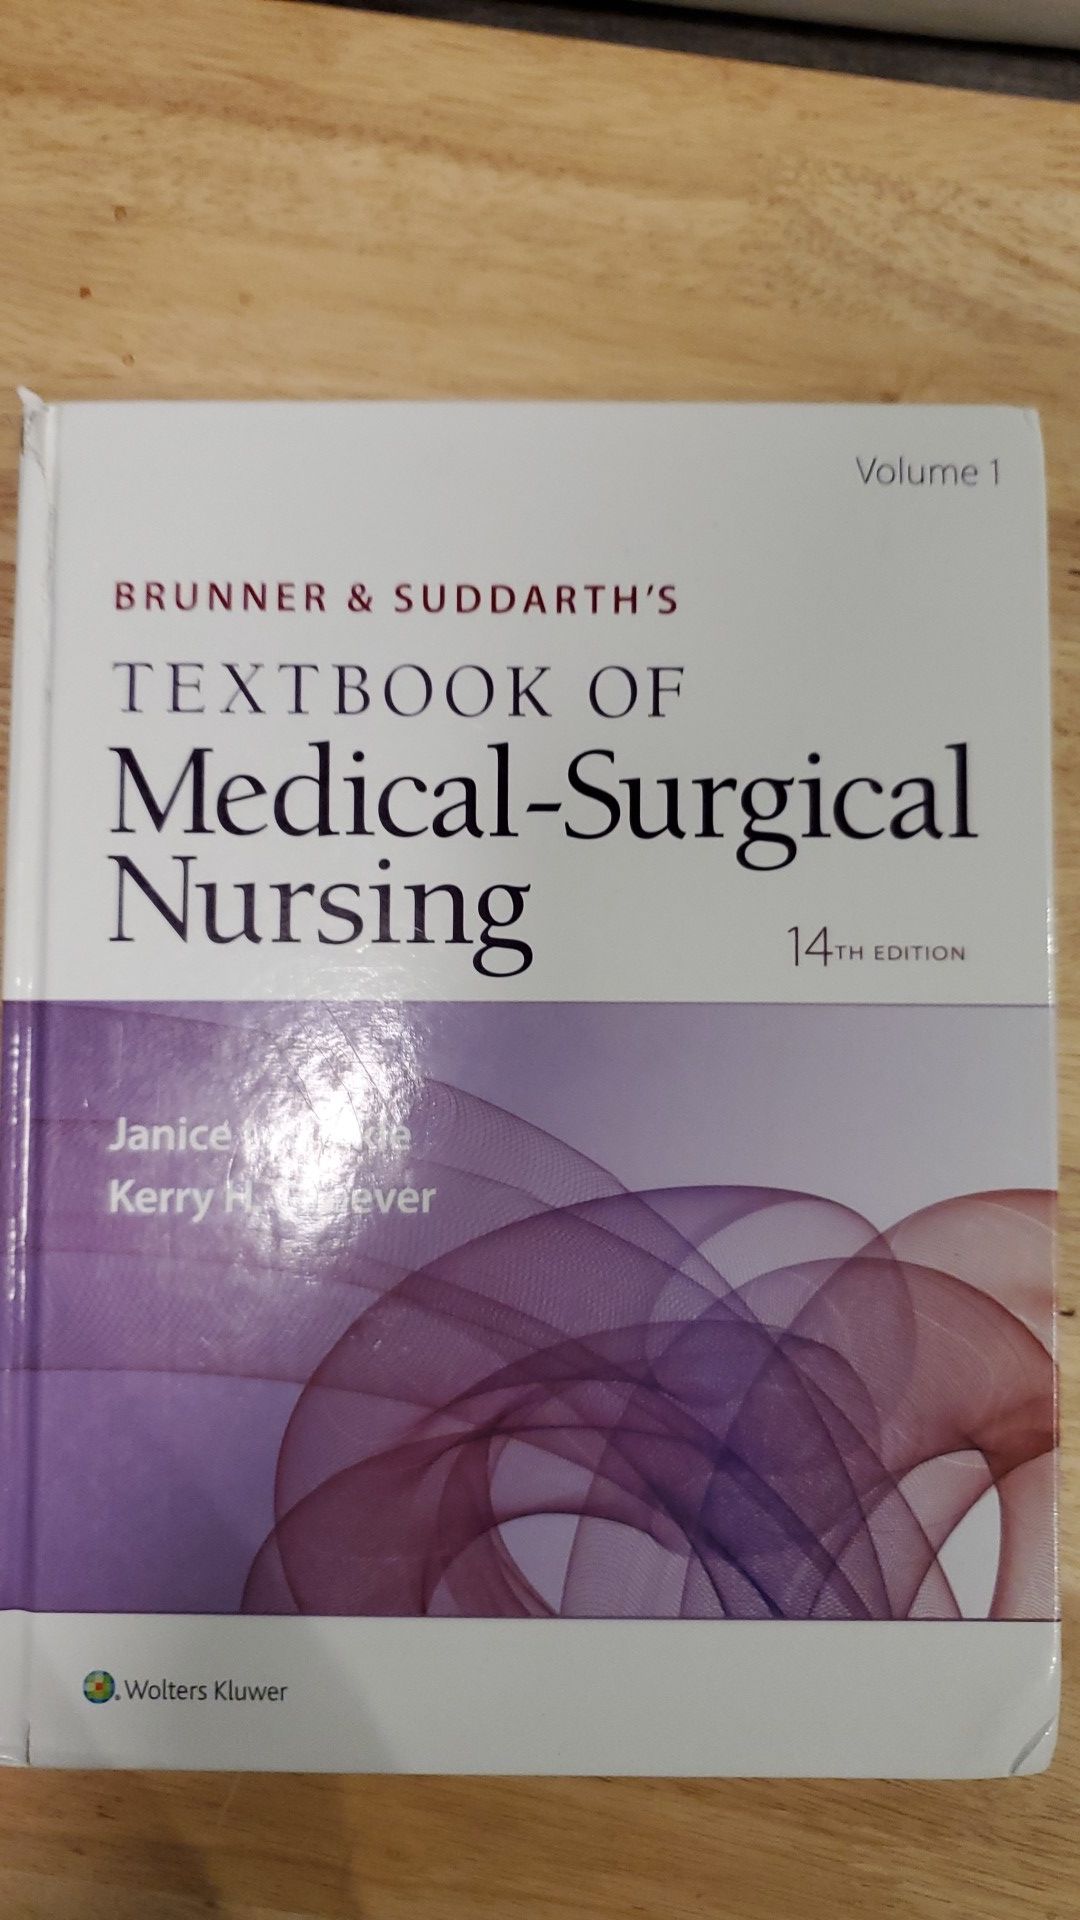 Brunner & suddarth's textbook of medical-surgical nursing 14th edition VOLUME 1 ONLY